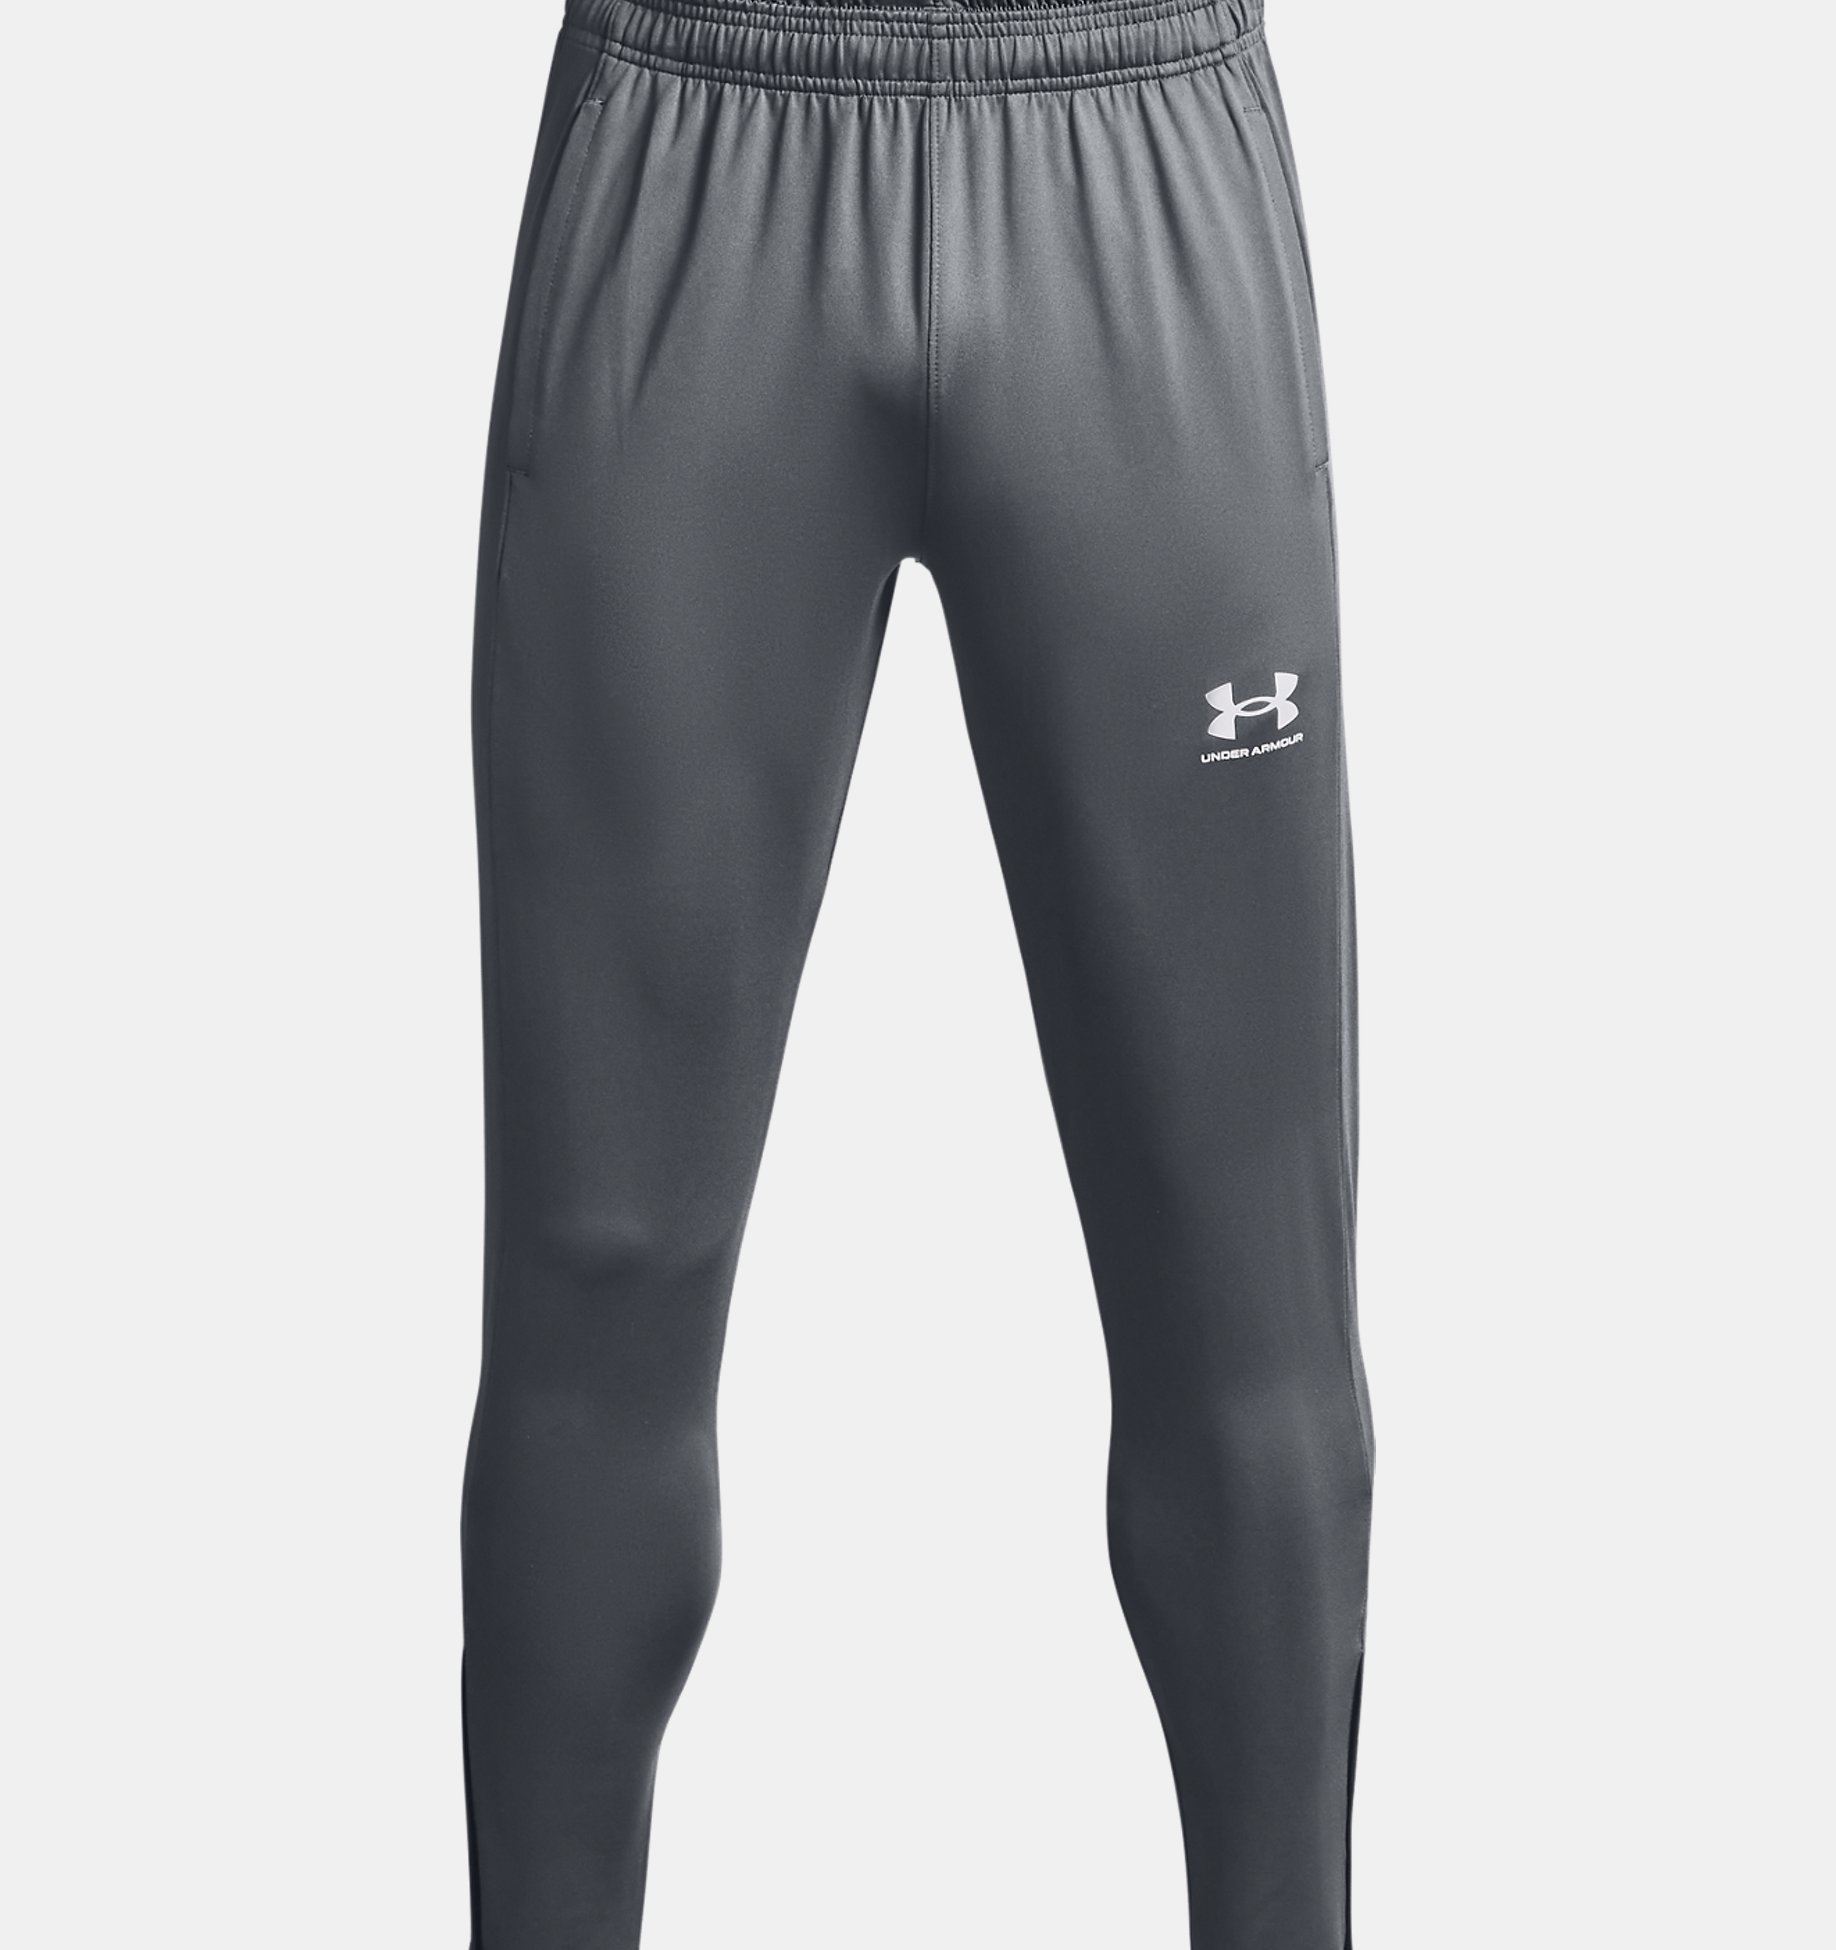 002 Black/Wire/Halo Gray MD Under Armour Mens Challenger Iii Knit Short 